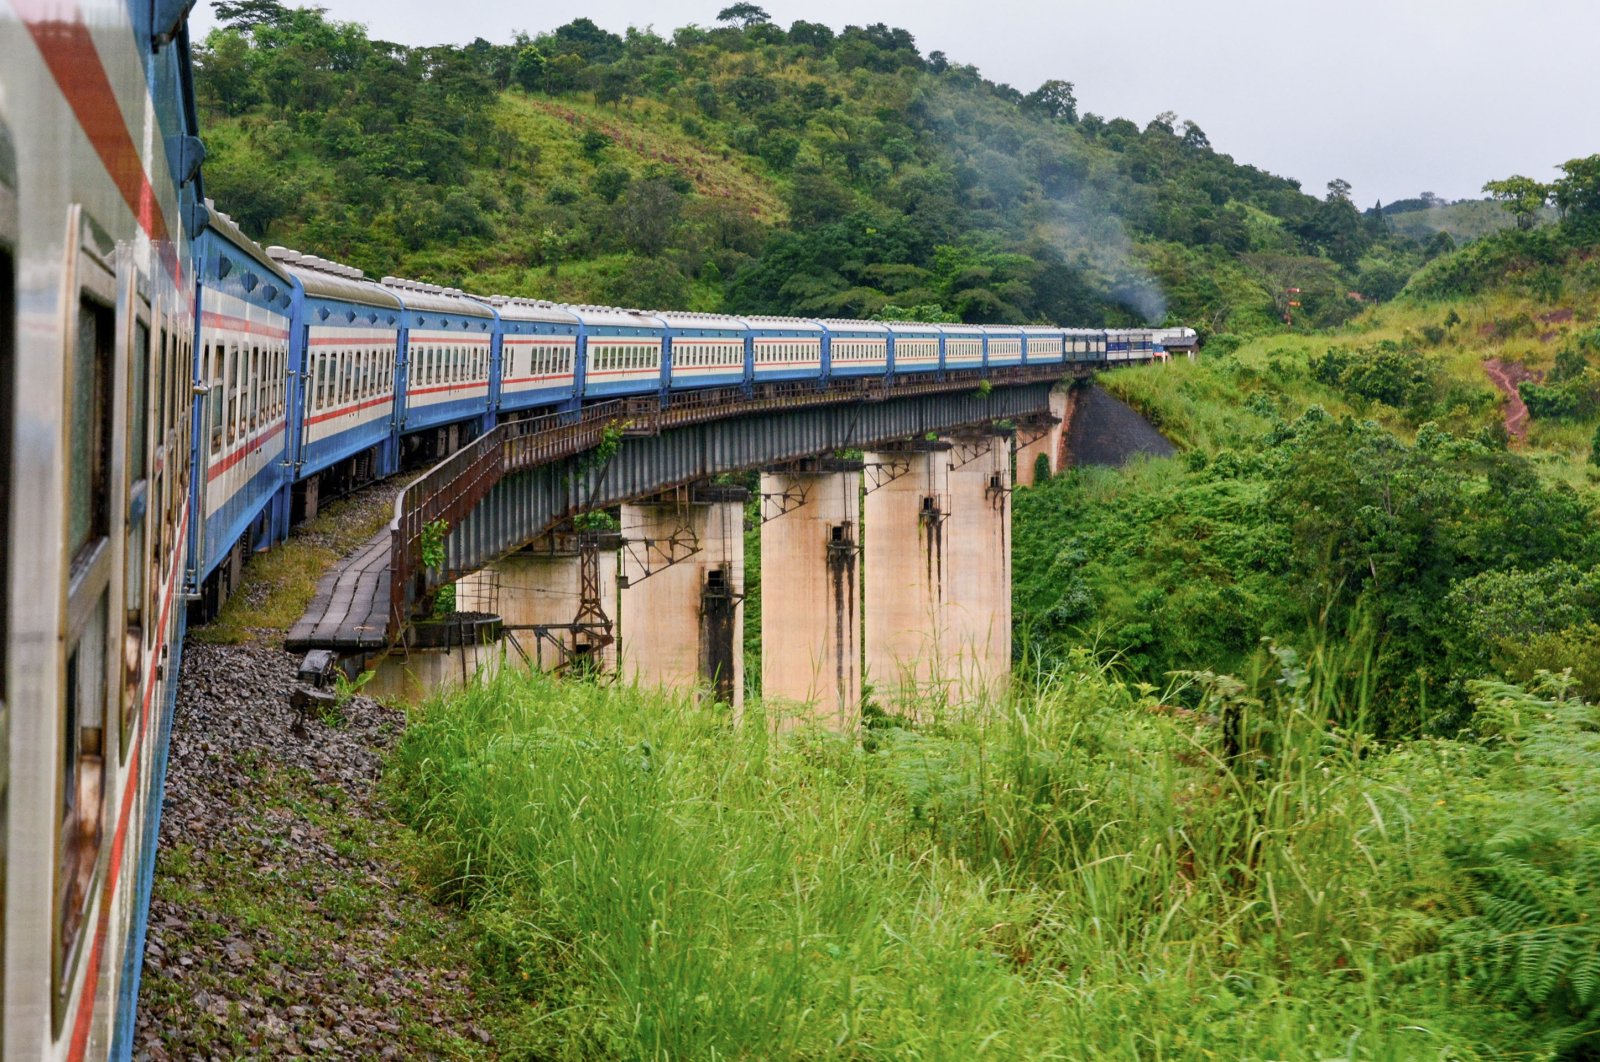 A train passing through the beautiful natural landscapes of Tanzania, Jan. 17, 2022. (ShutterStock)